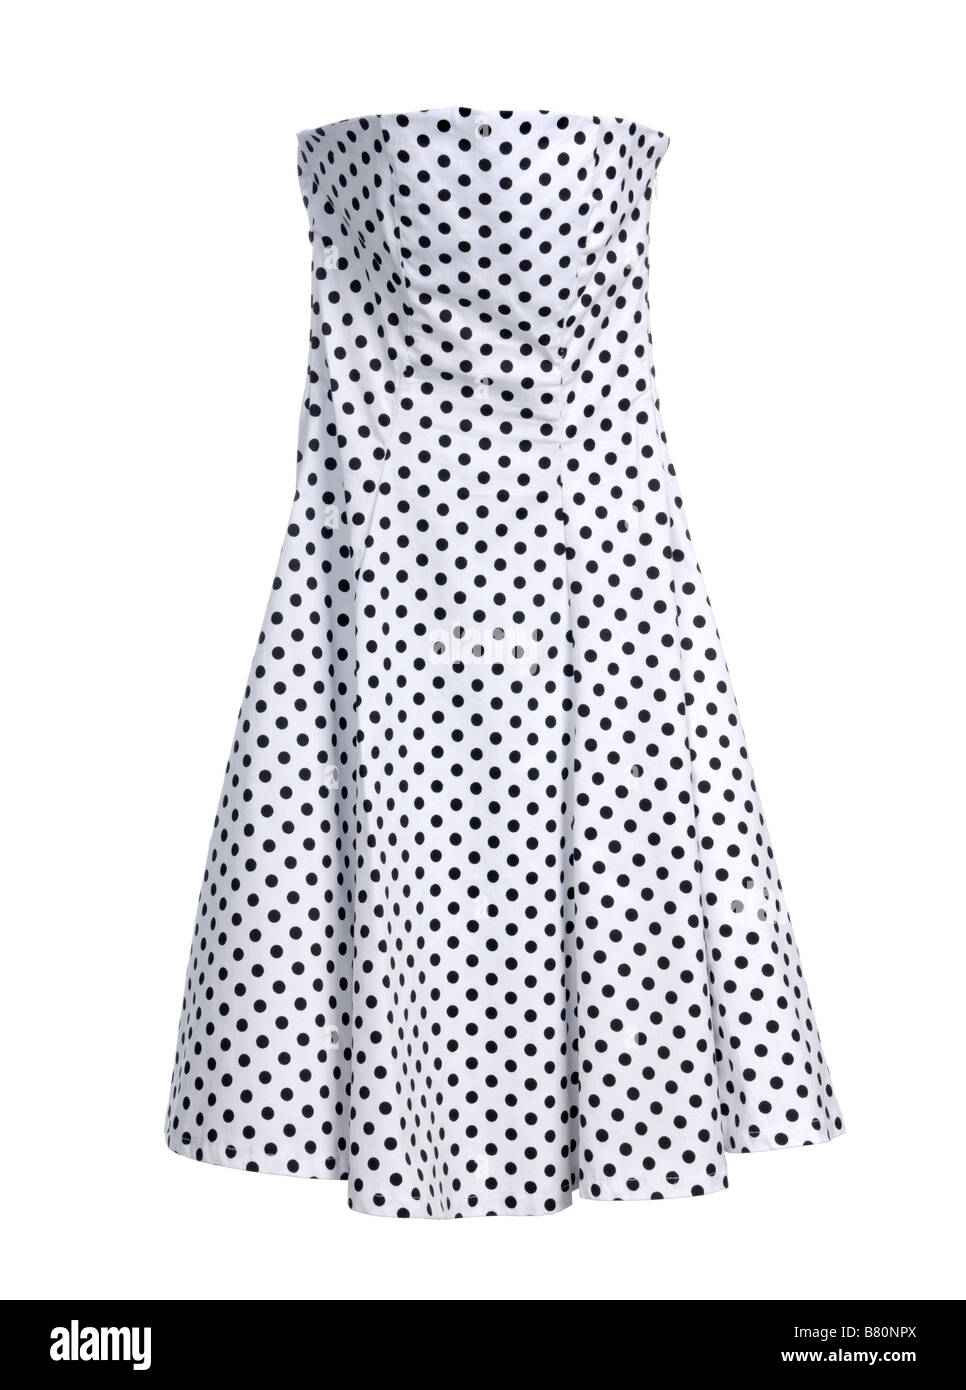 Buy > black and white dots frock > in stock